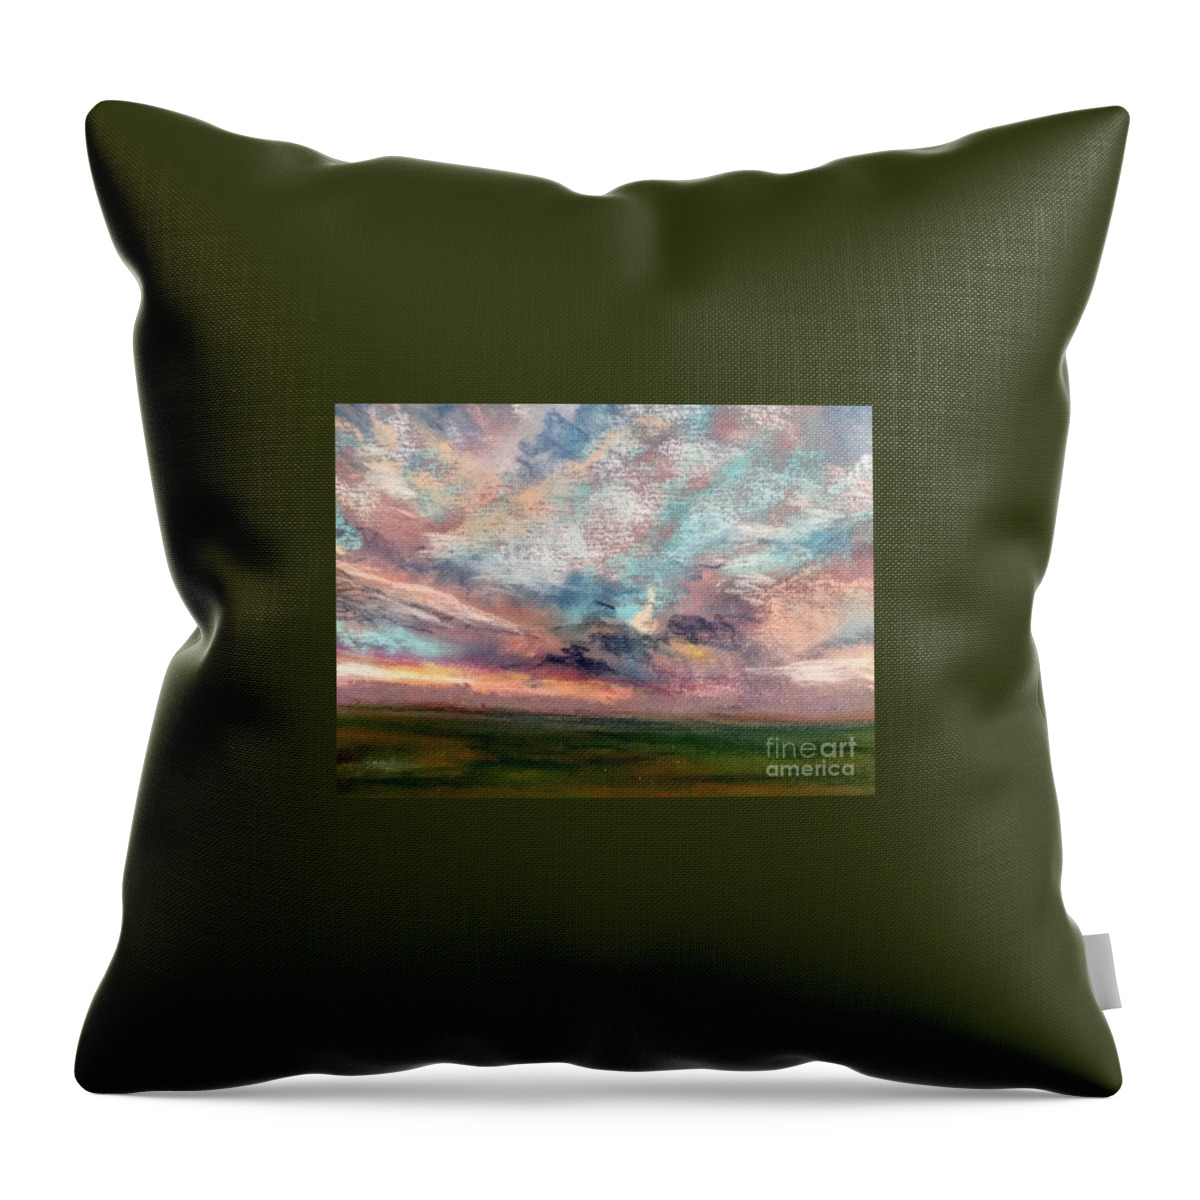 Sunset Throw Pillow featuring the painting Hillsboro Sunset by Constance Gehring